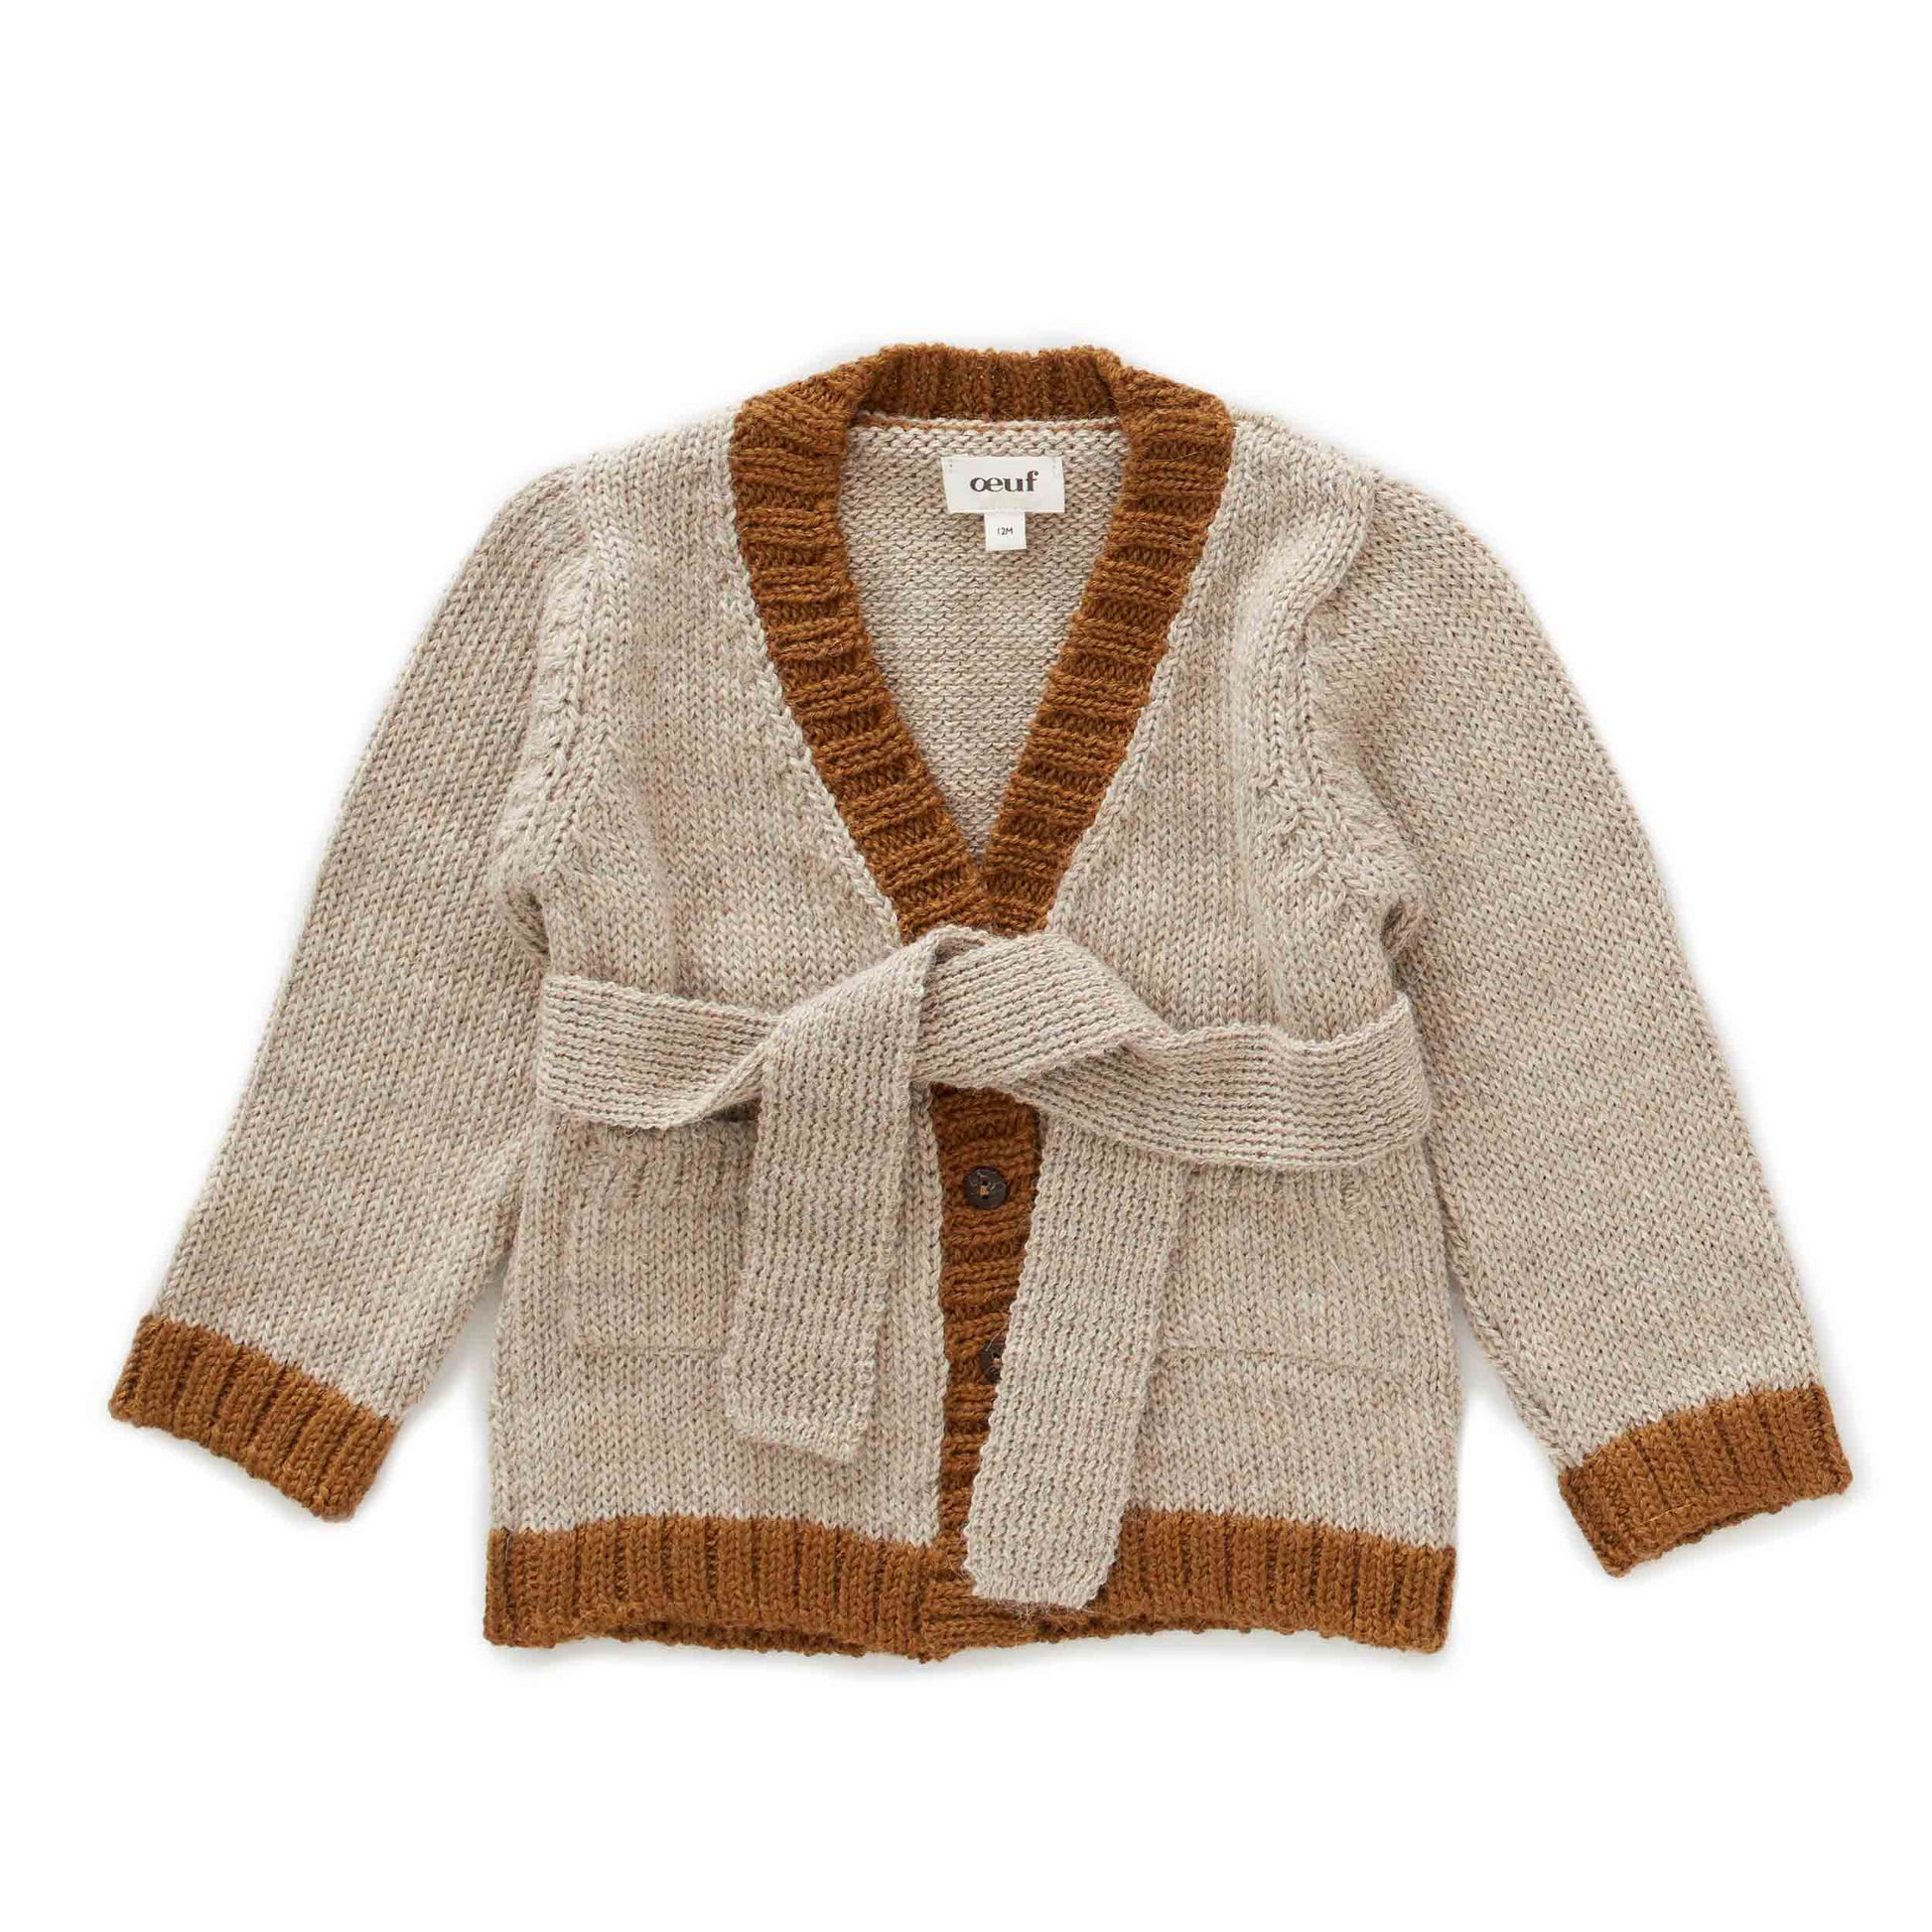 Oeuf Kids cardigans Belted Cardi-Grey/Olive - Ever Simplicity